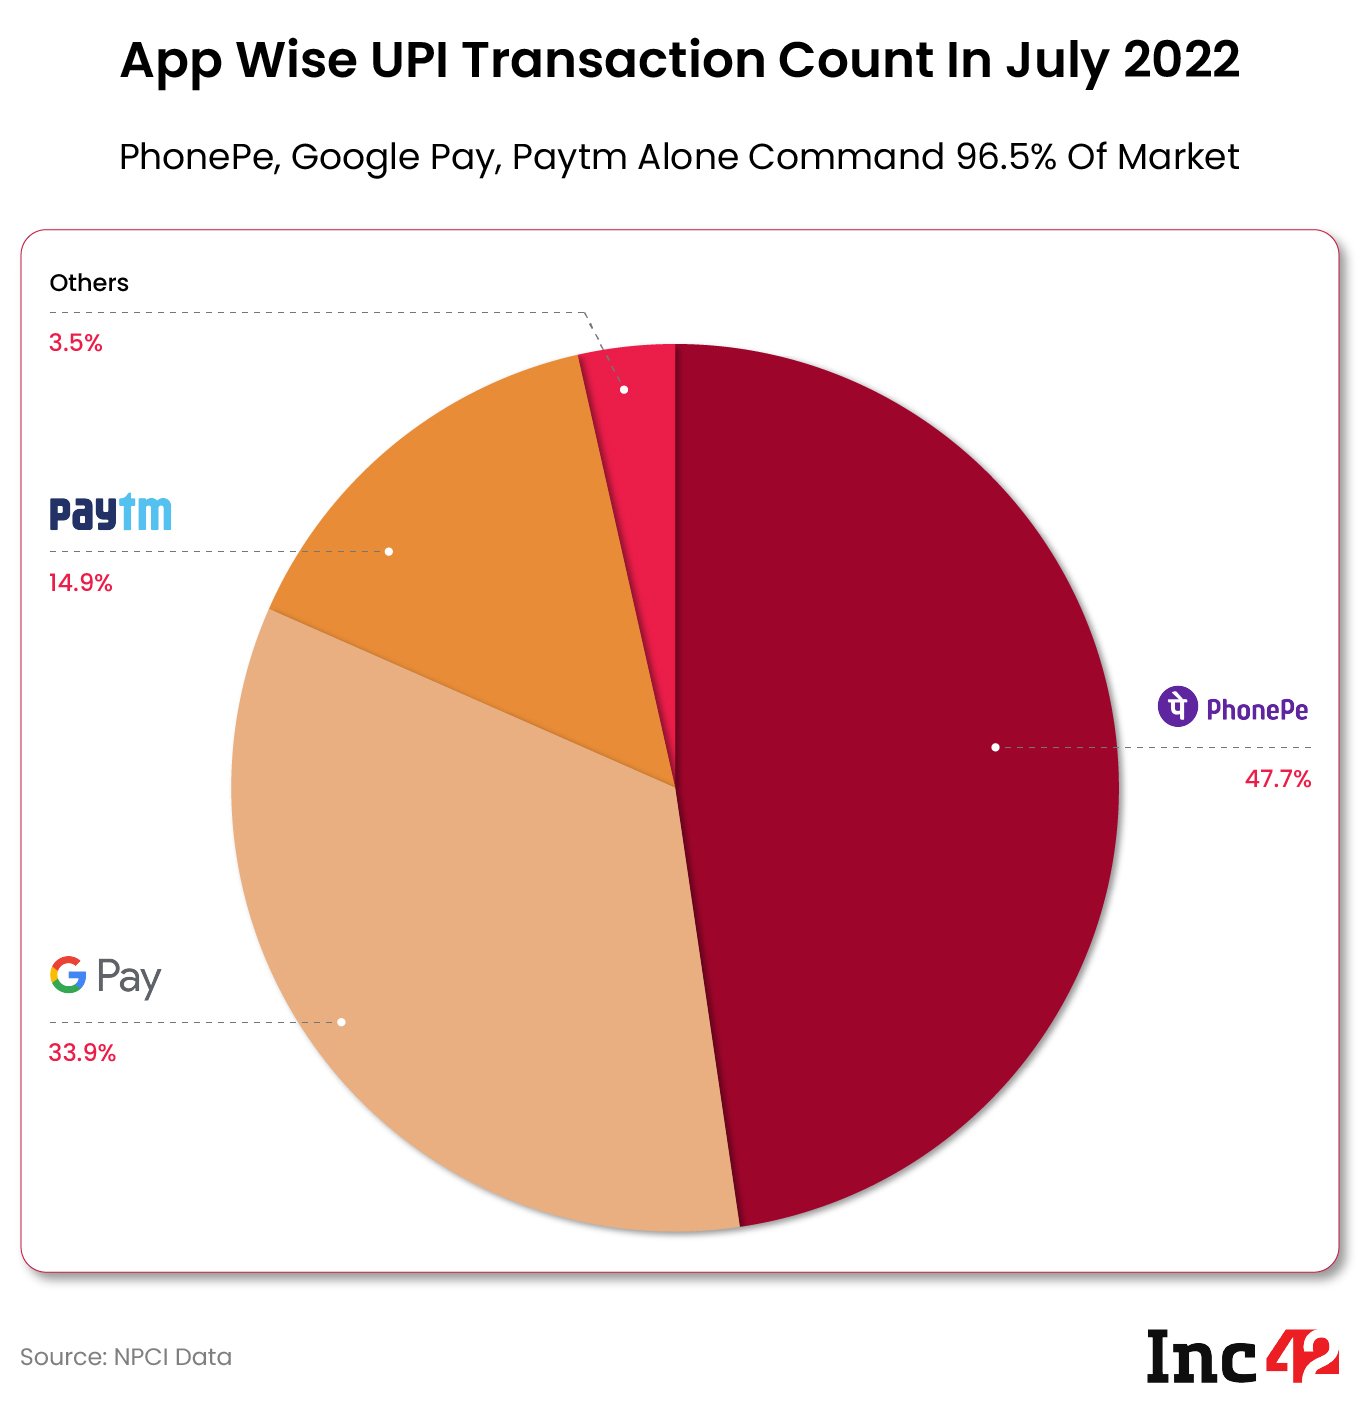 PhonePe, Google Pay & Paytm Transaction Count